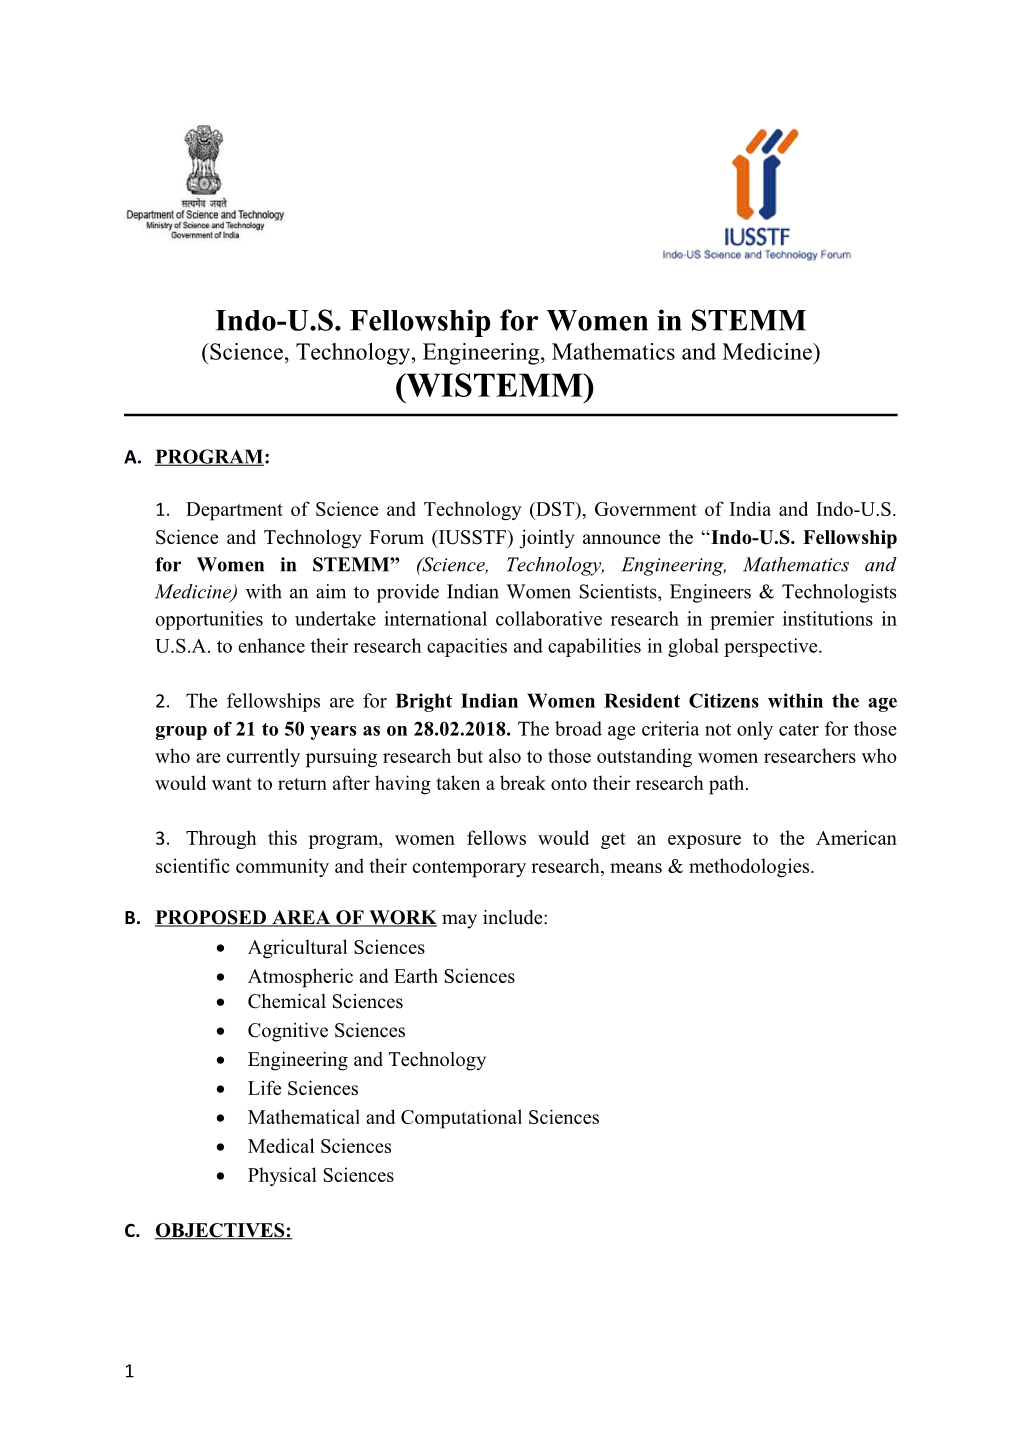 Indo-U.S. Fellowship for Women in STEMM